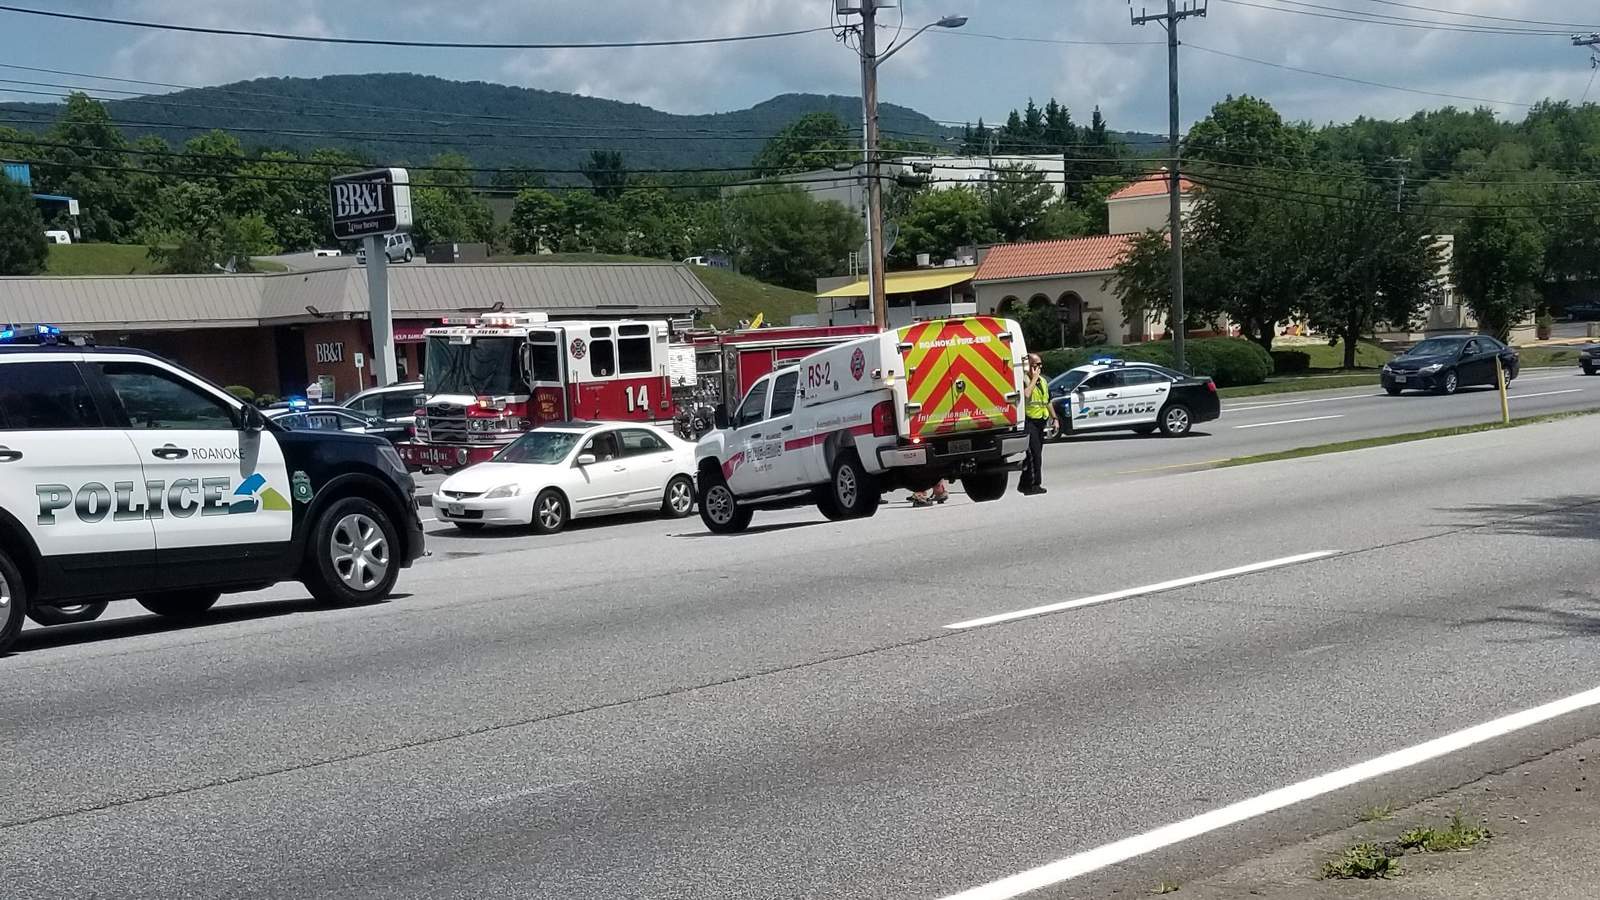 Woman hospitalized after being hit by a car in Roanoke near county border